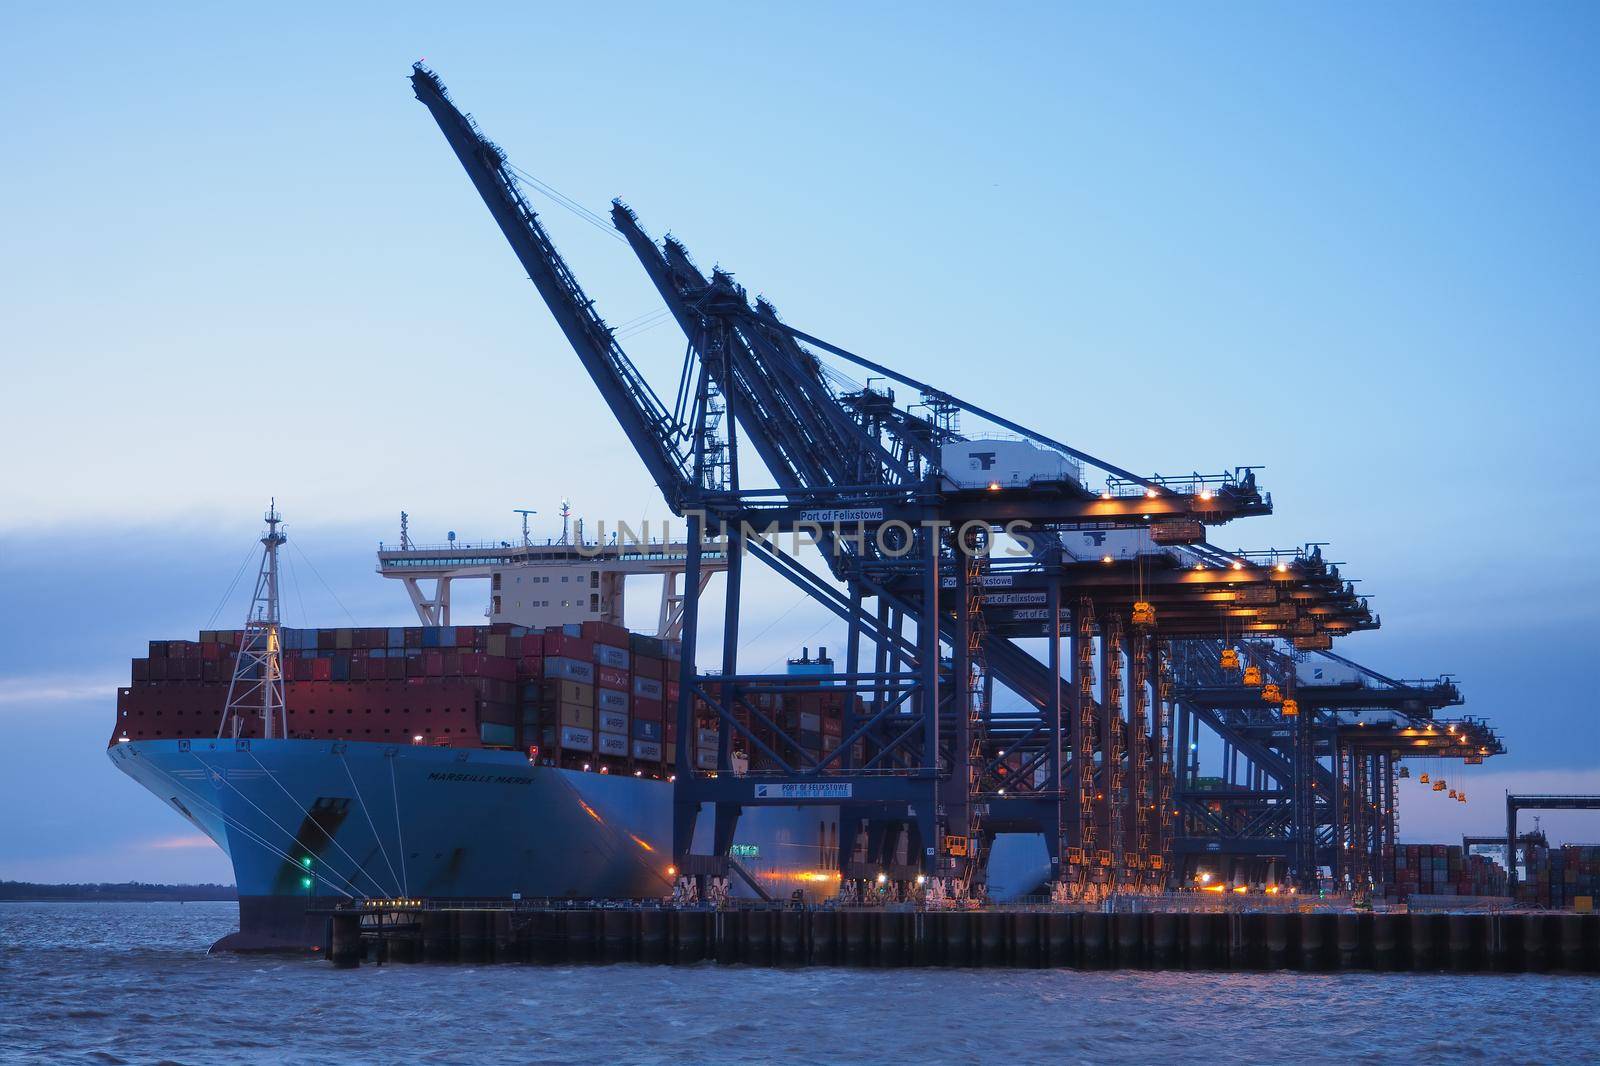 Port of Felixstowe, Suffolk, cranes loading containers to Marseille Maersk dusk by PhilHarland